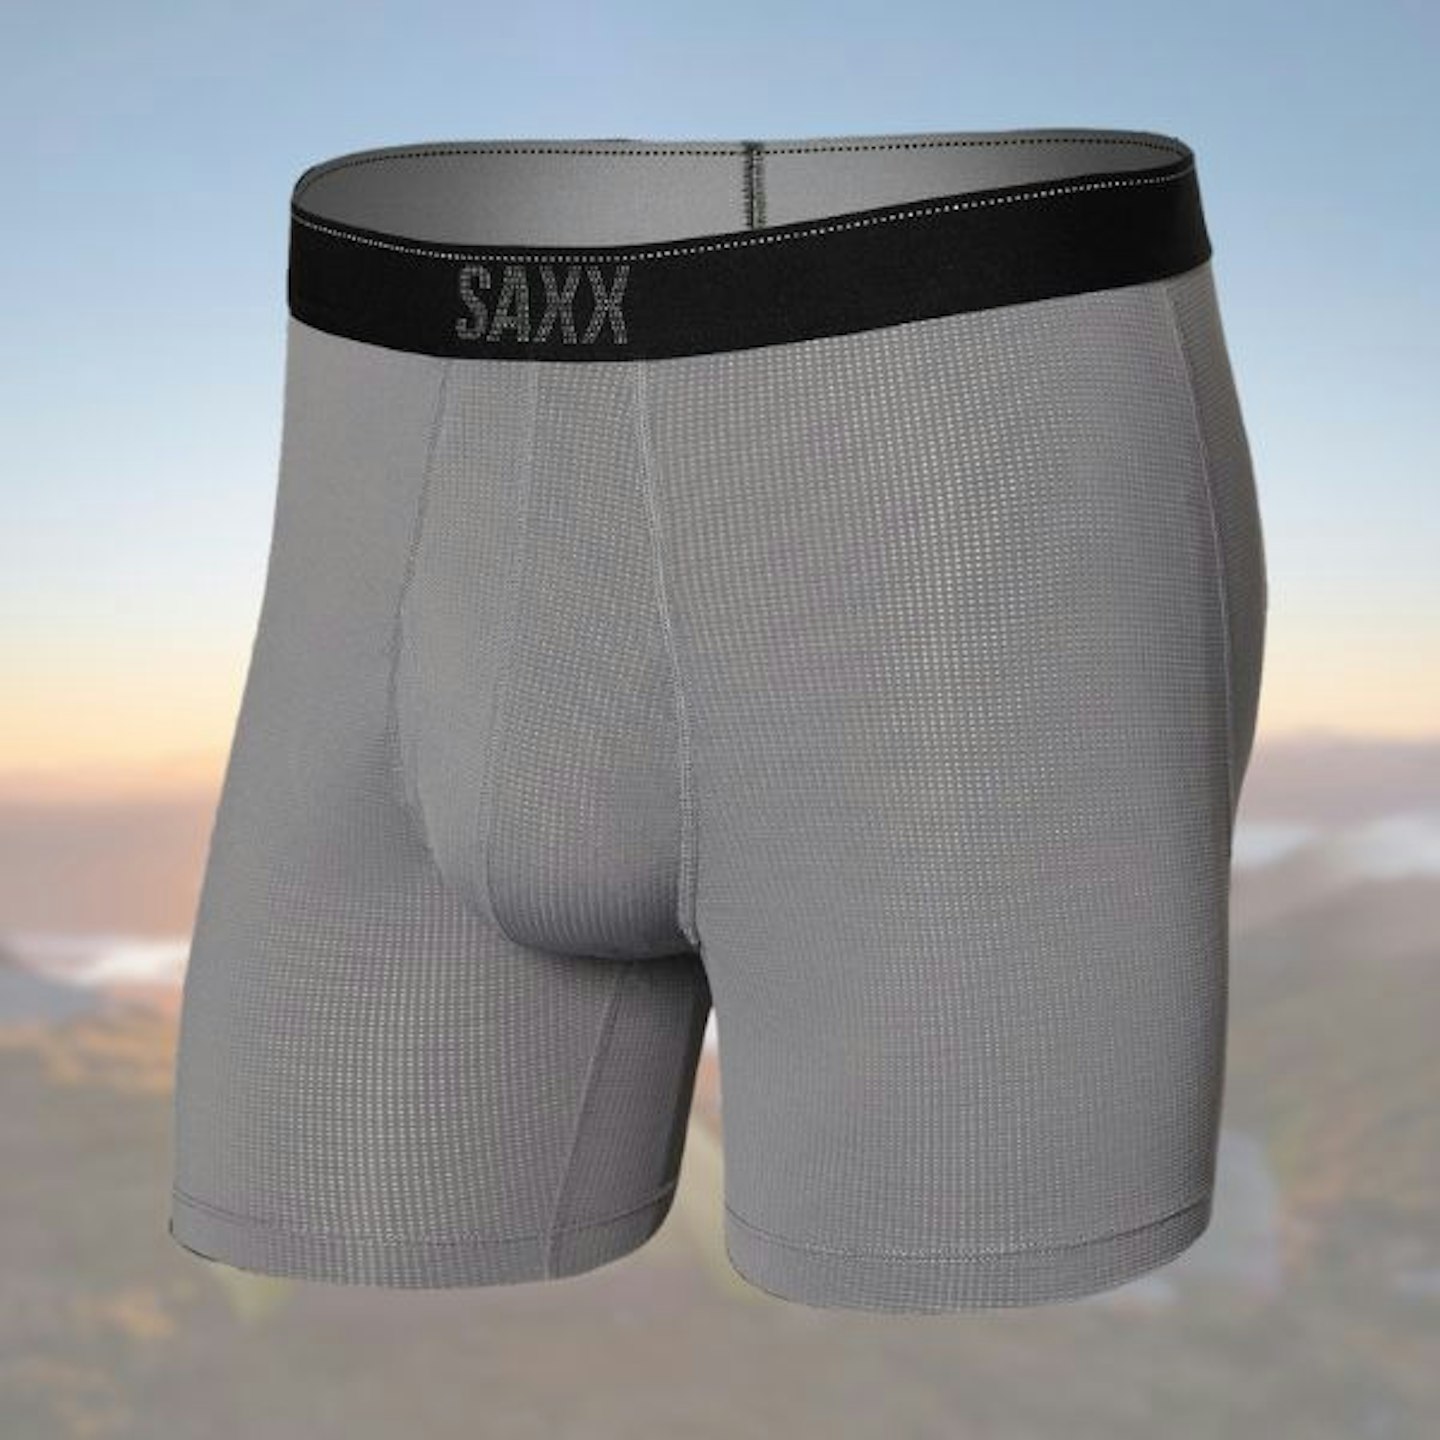 Saxx Quest Quick Dry Mesh Boxer Brief Fly - Synthetic base layer